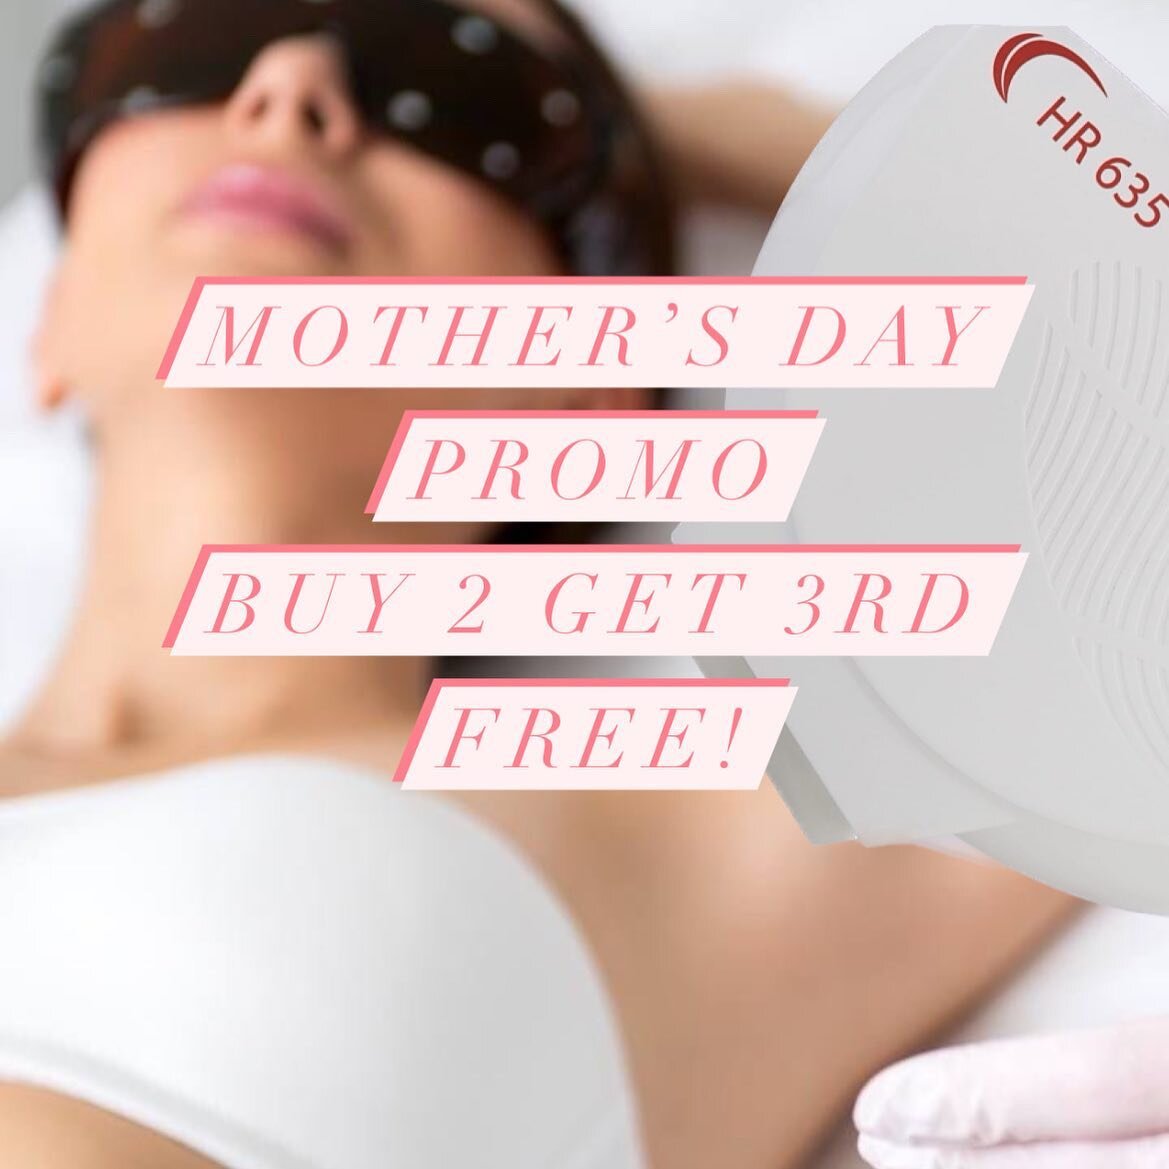 ✨May Promotion✨
✨Buy 2 get the 3rd FREE✨

💎For the whole month of May on any Laser Hair Removal or Skin Rejuvenation Treatment💎

🎁Gift Certificates Available🎁